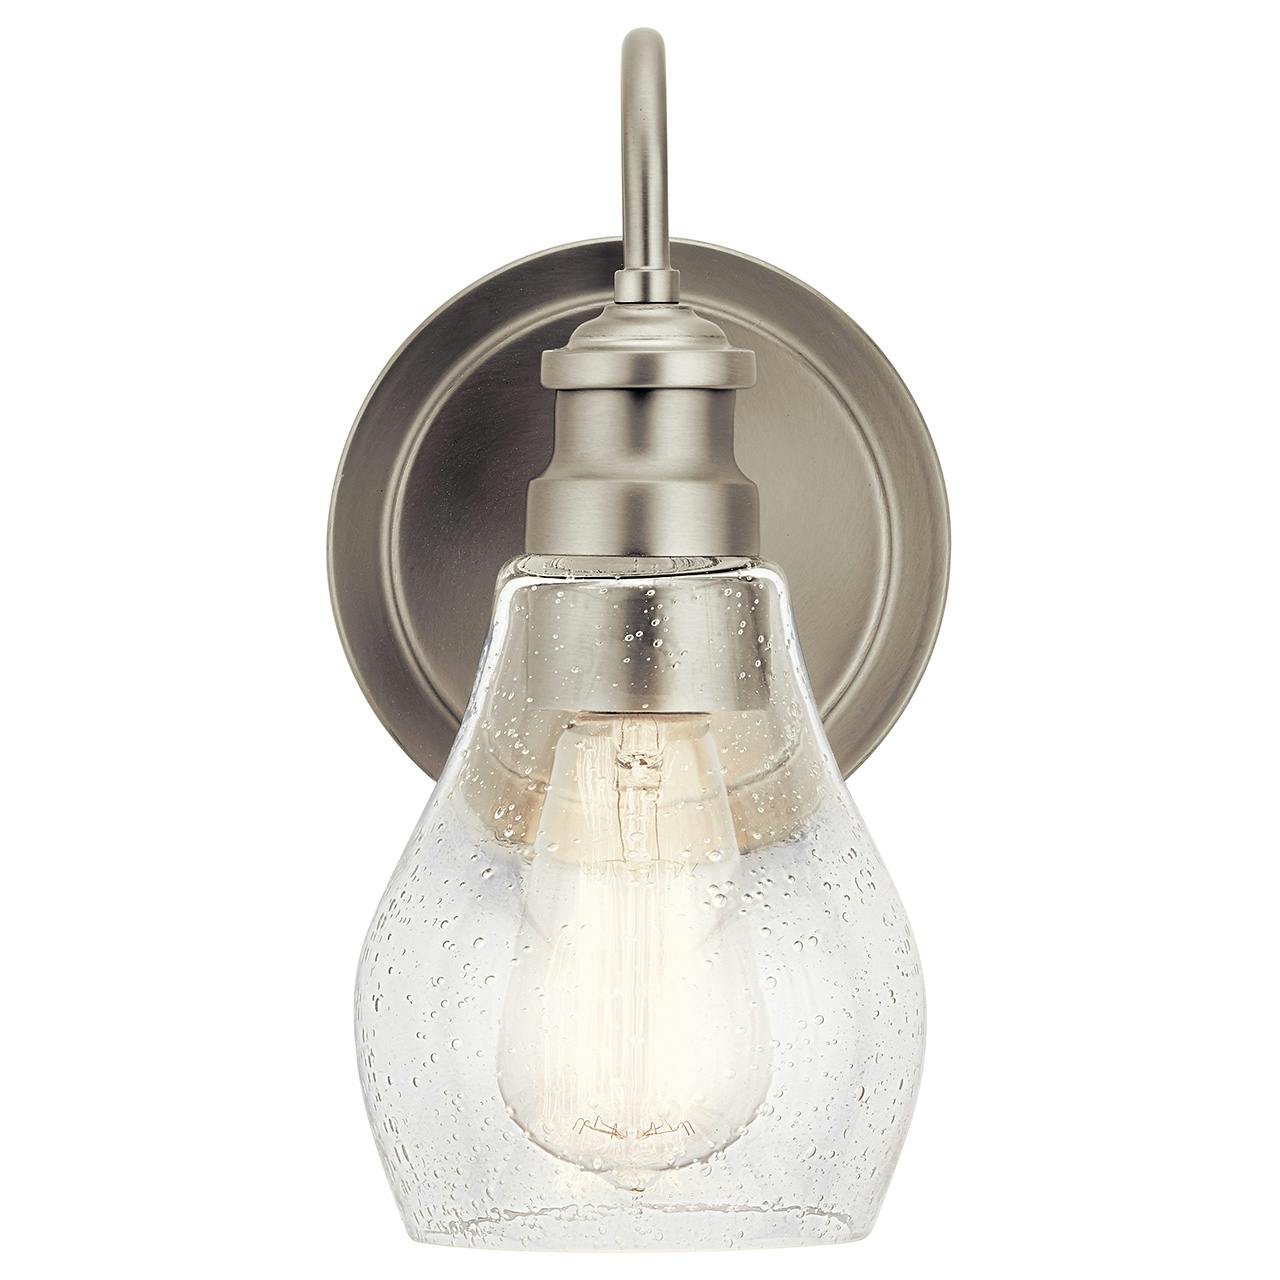 The Greenbrier™ 1 Light Wall Sconce Nickel facing down on a white background